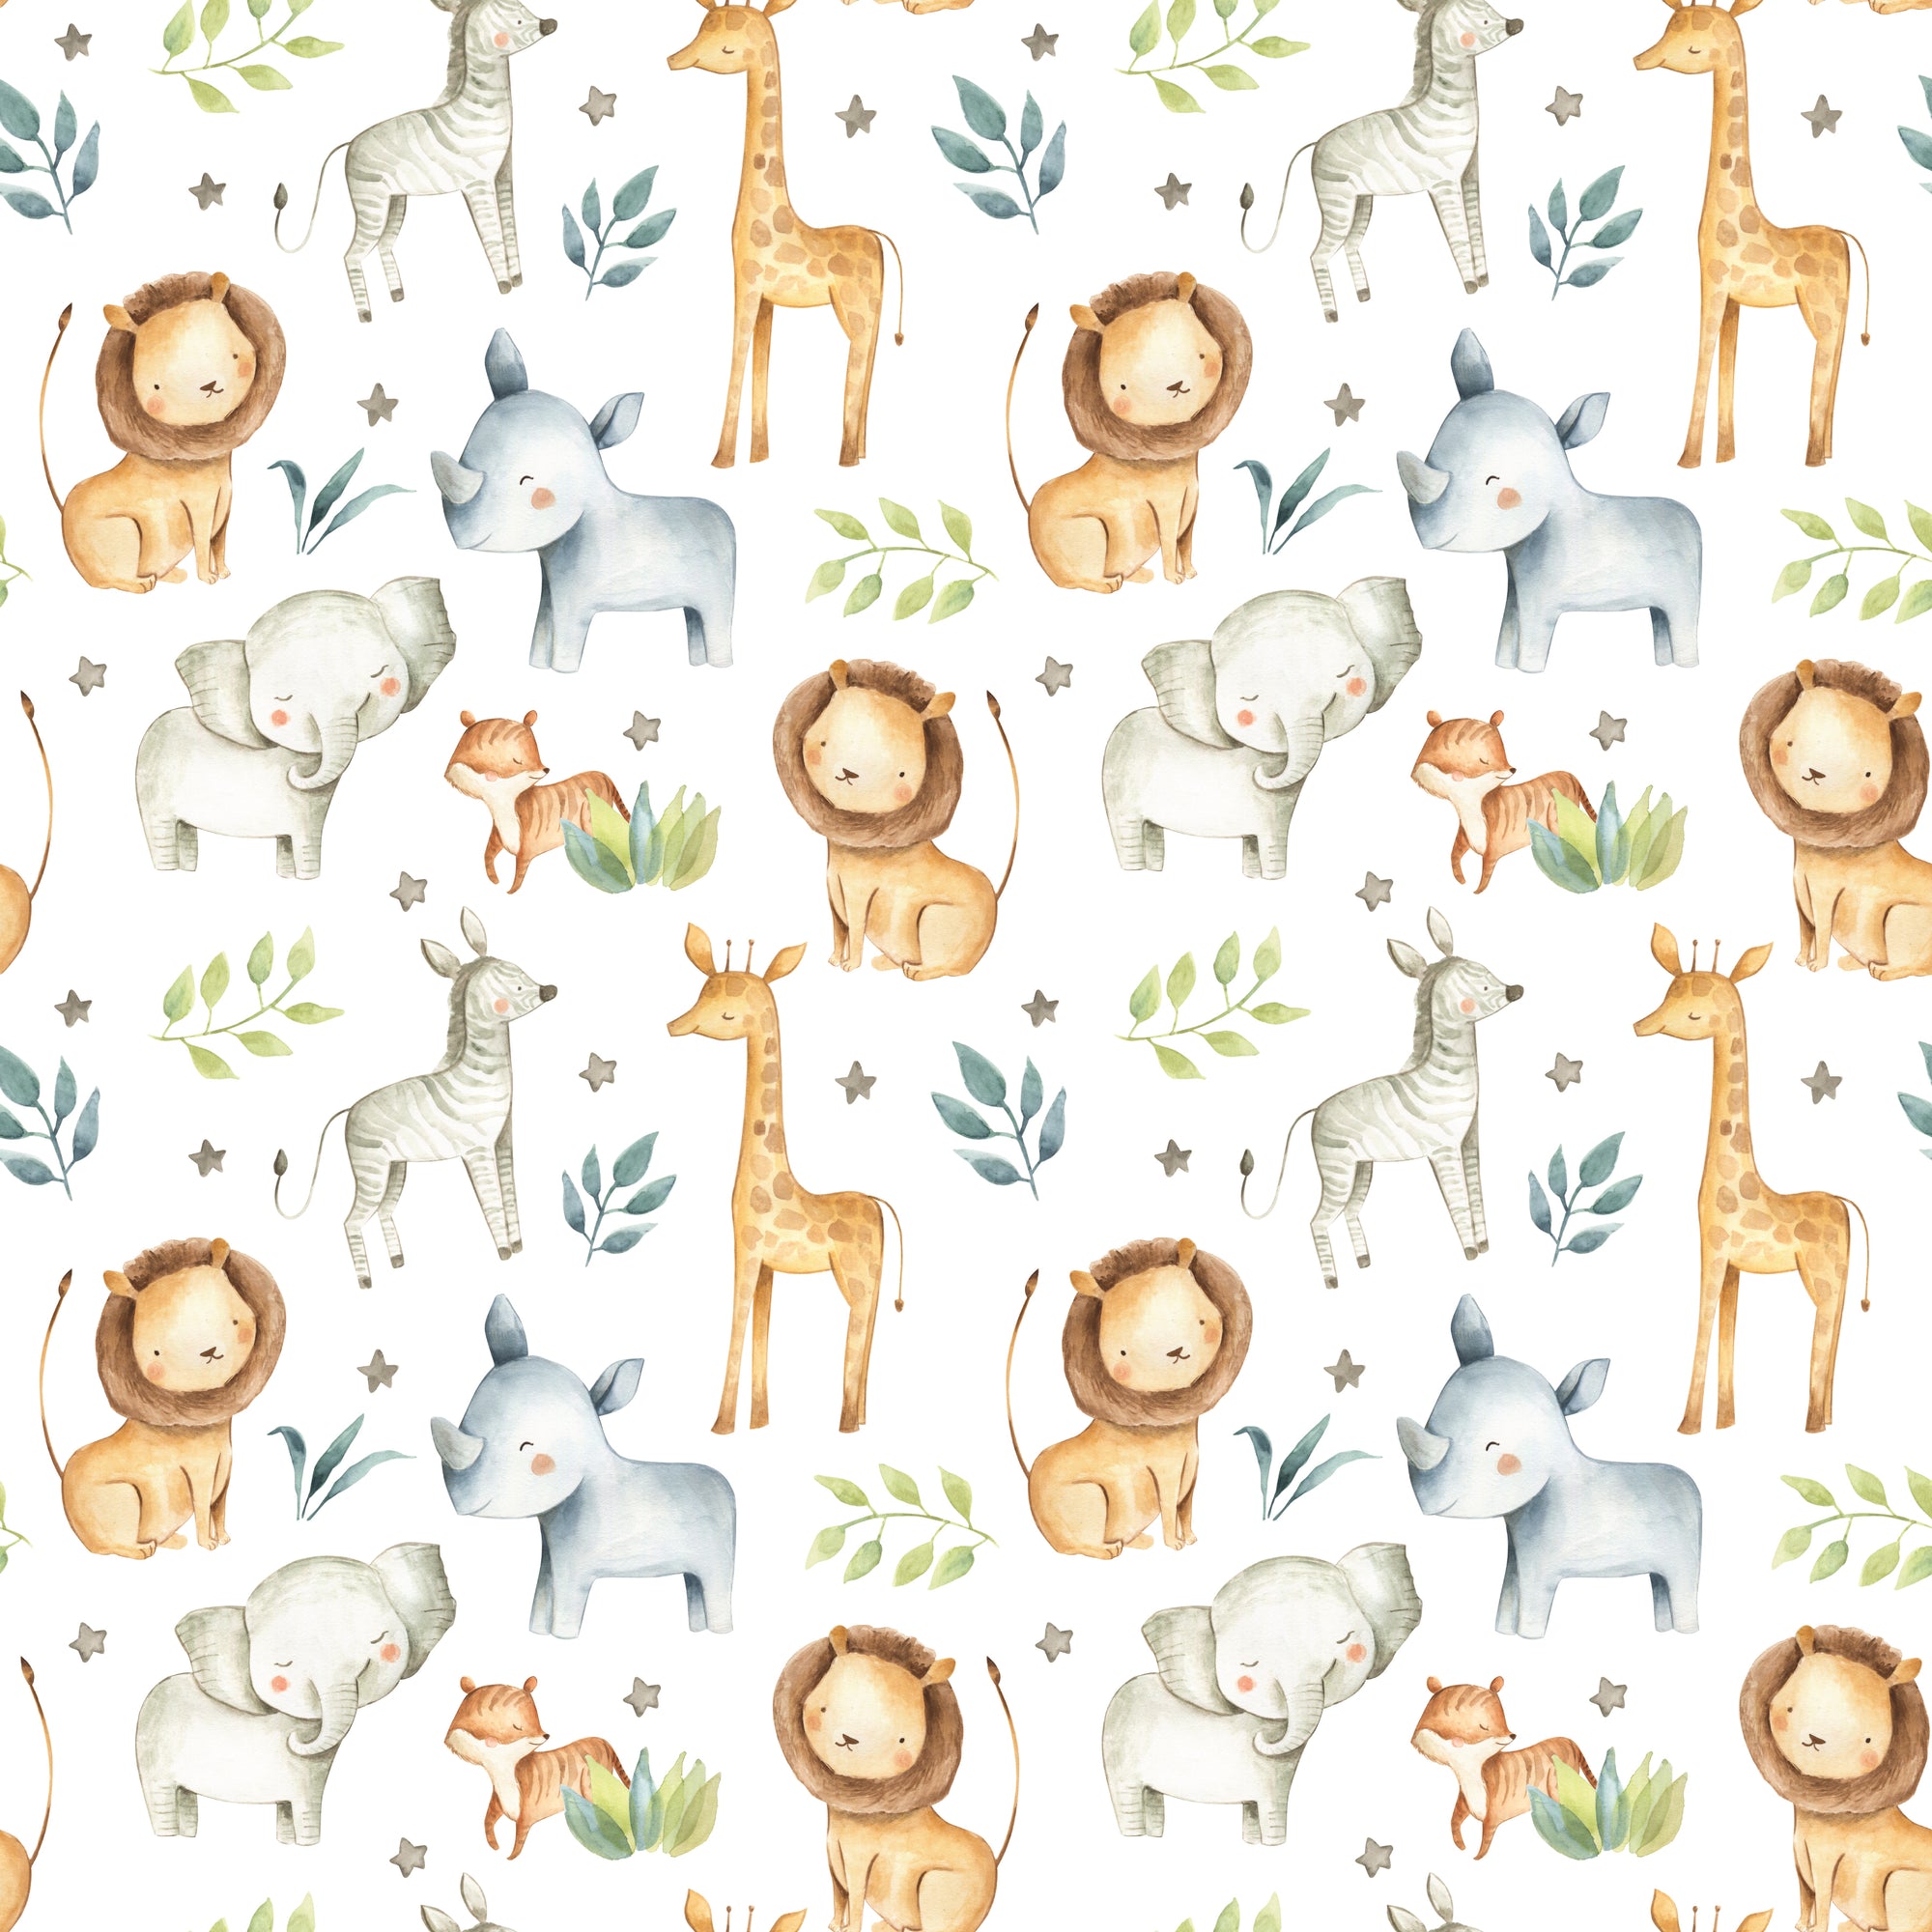 New Baby Wrapping Paper, Baby Shower Gift Wrap, Baby Girl Boy Gender  Neutral Paper, Newborn Gift Present, Nature Woodland Forest Calm Green 